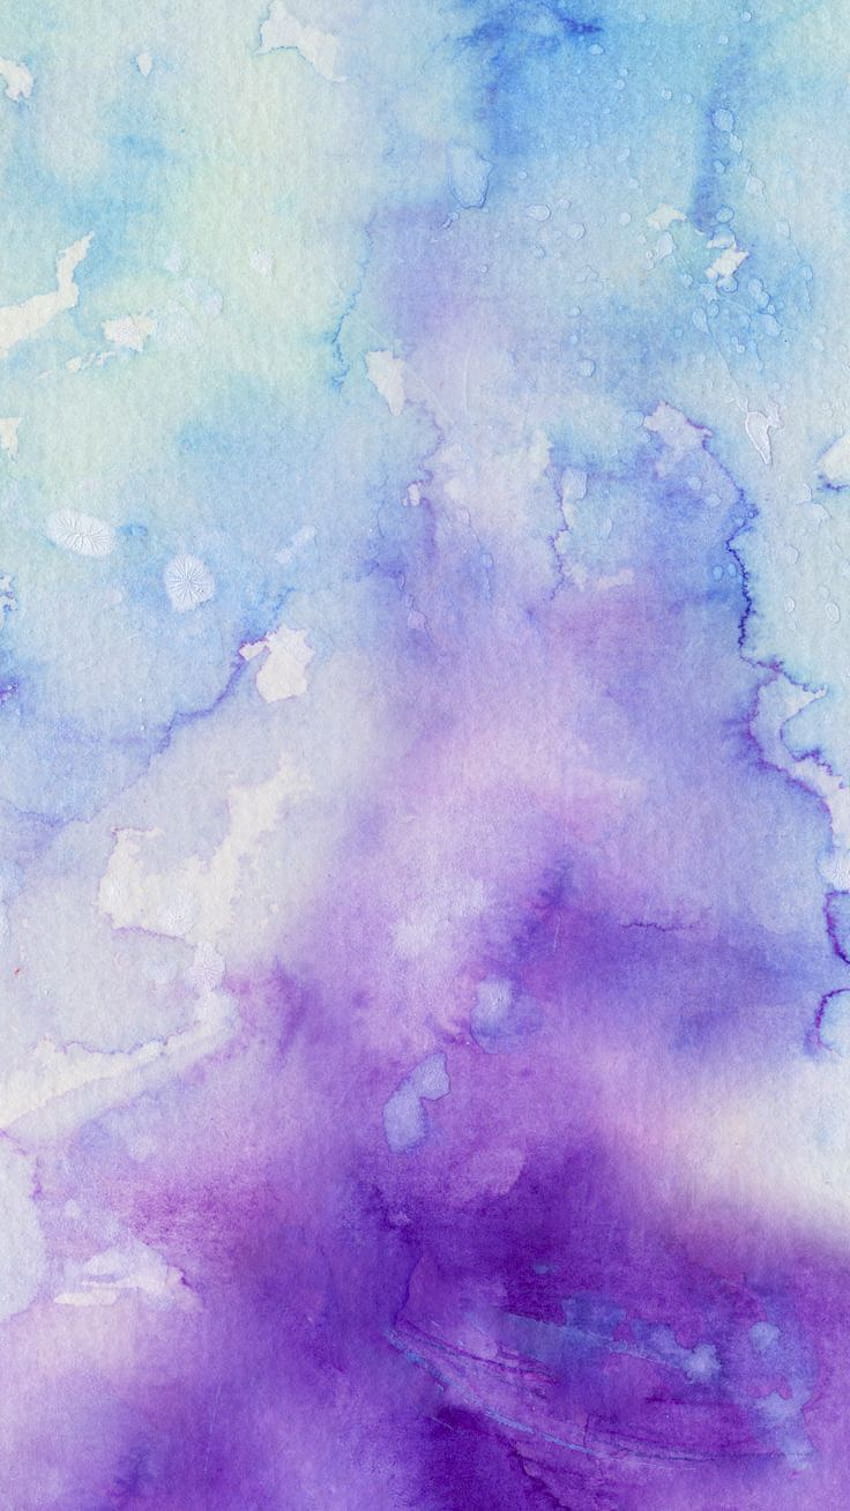 Watercolor Wallpaper Images HD Pictures For Free Vectors Download   Lovepikcom